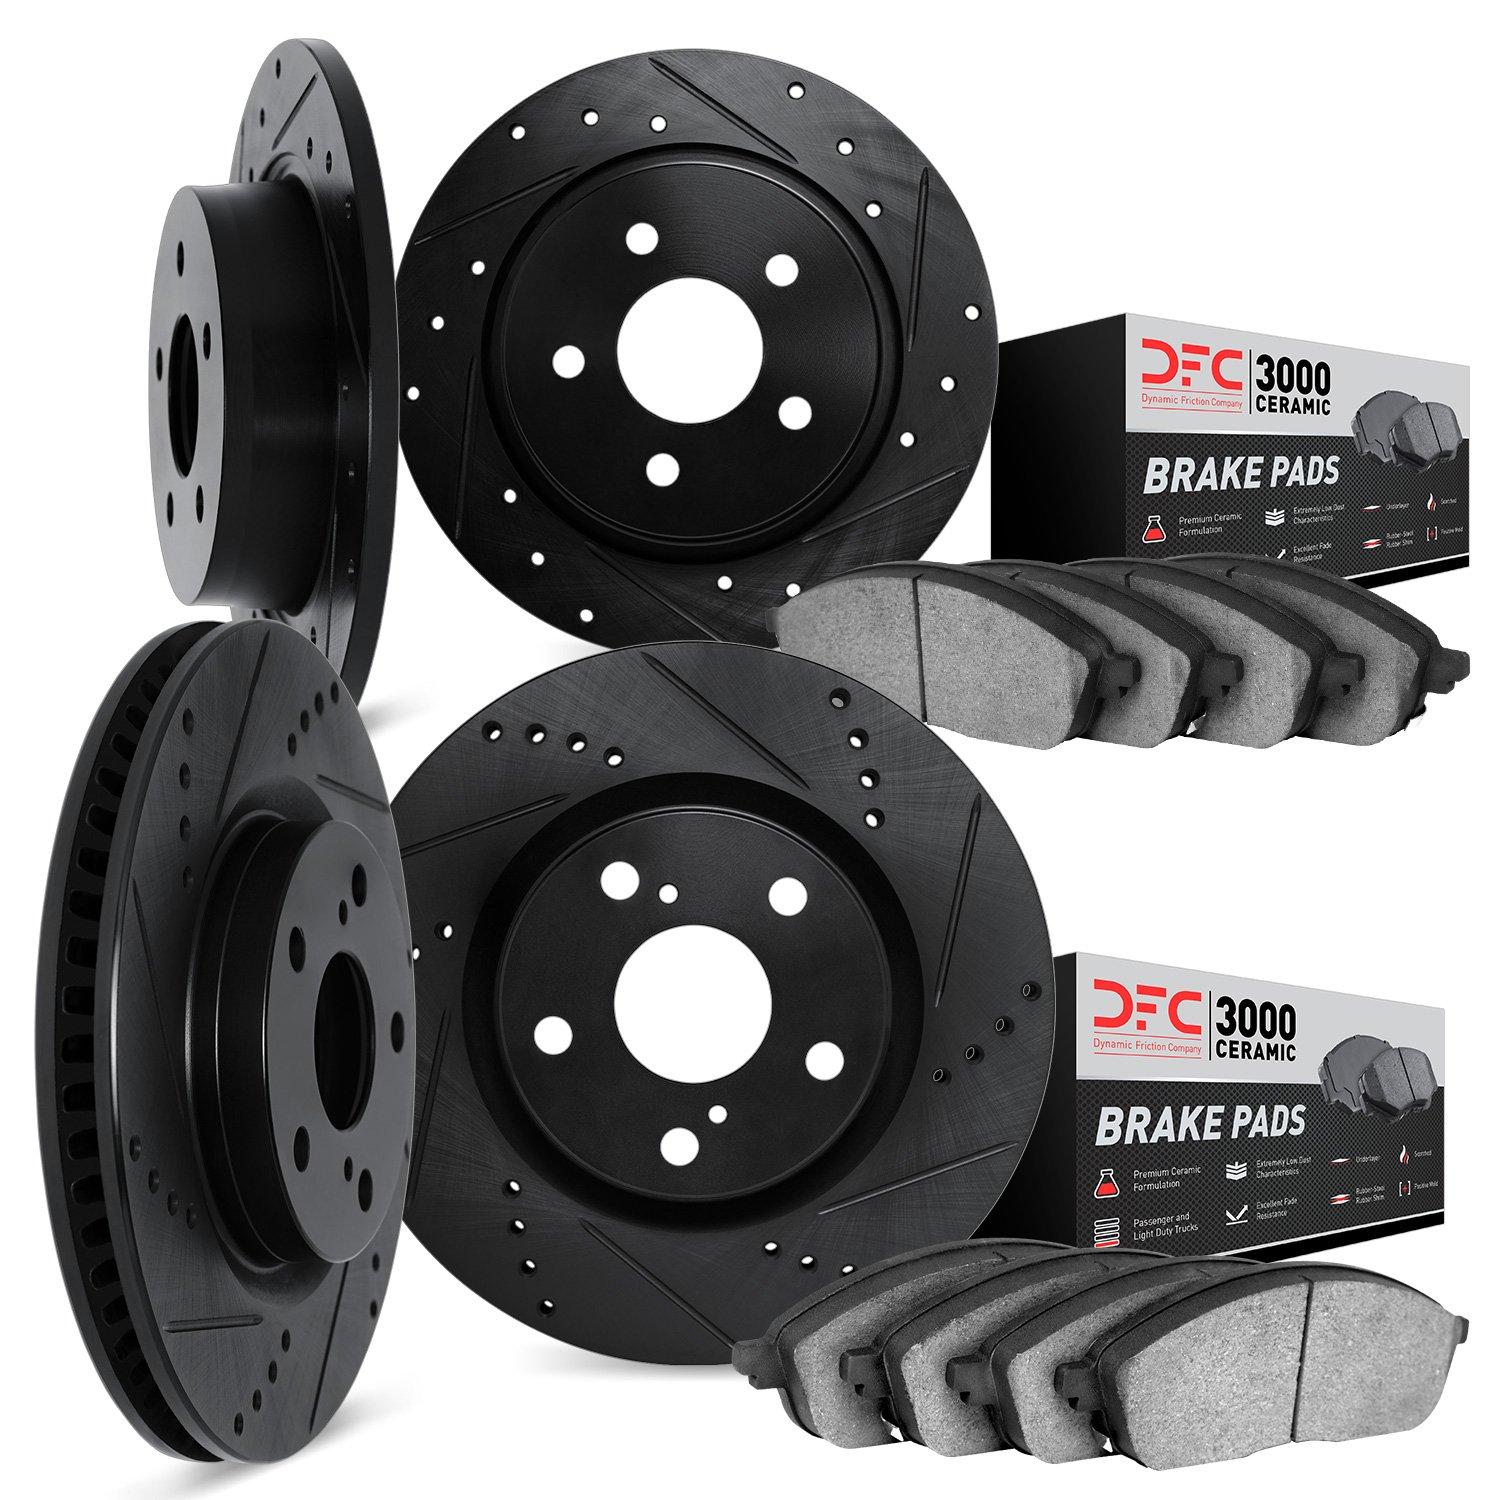 8304-59019 Drilled/Slotted Brake Rotors with 3000-Series Ceramic Brake Pads Kit [Black], 1996-1998 Acura/Honda, Position: Front